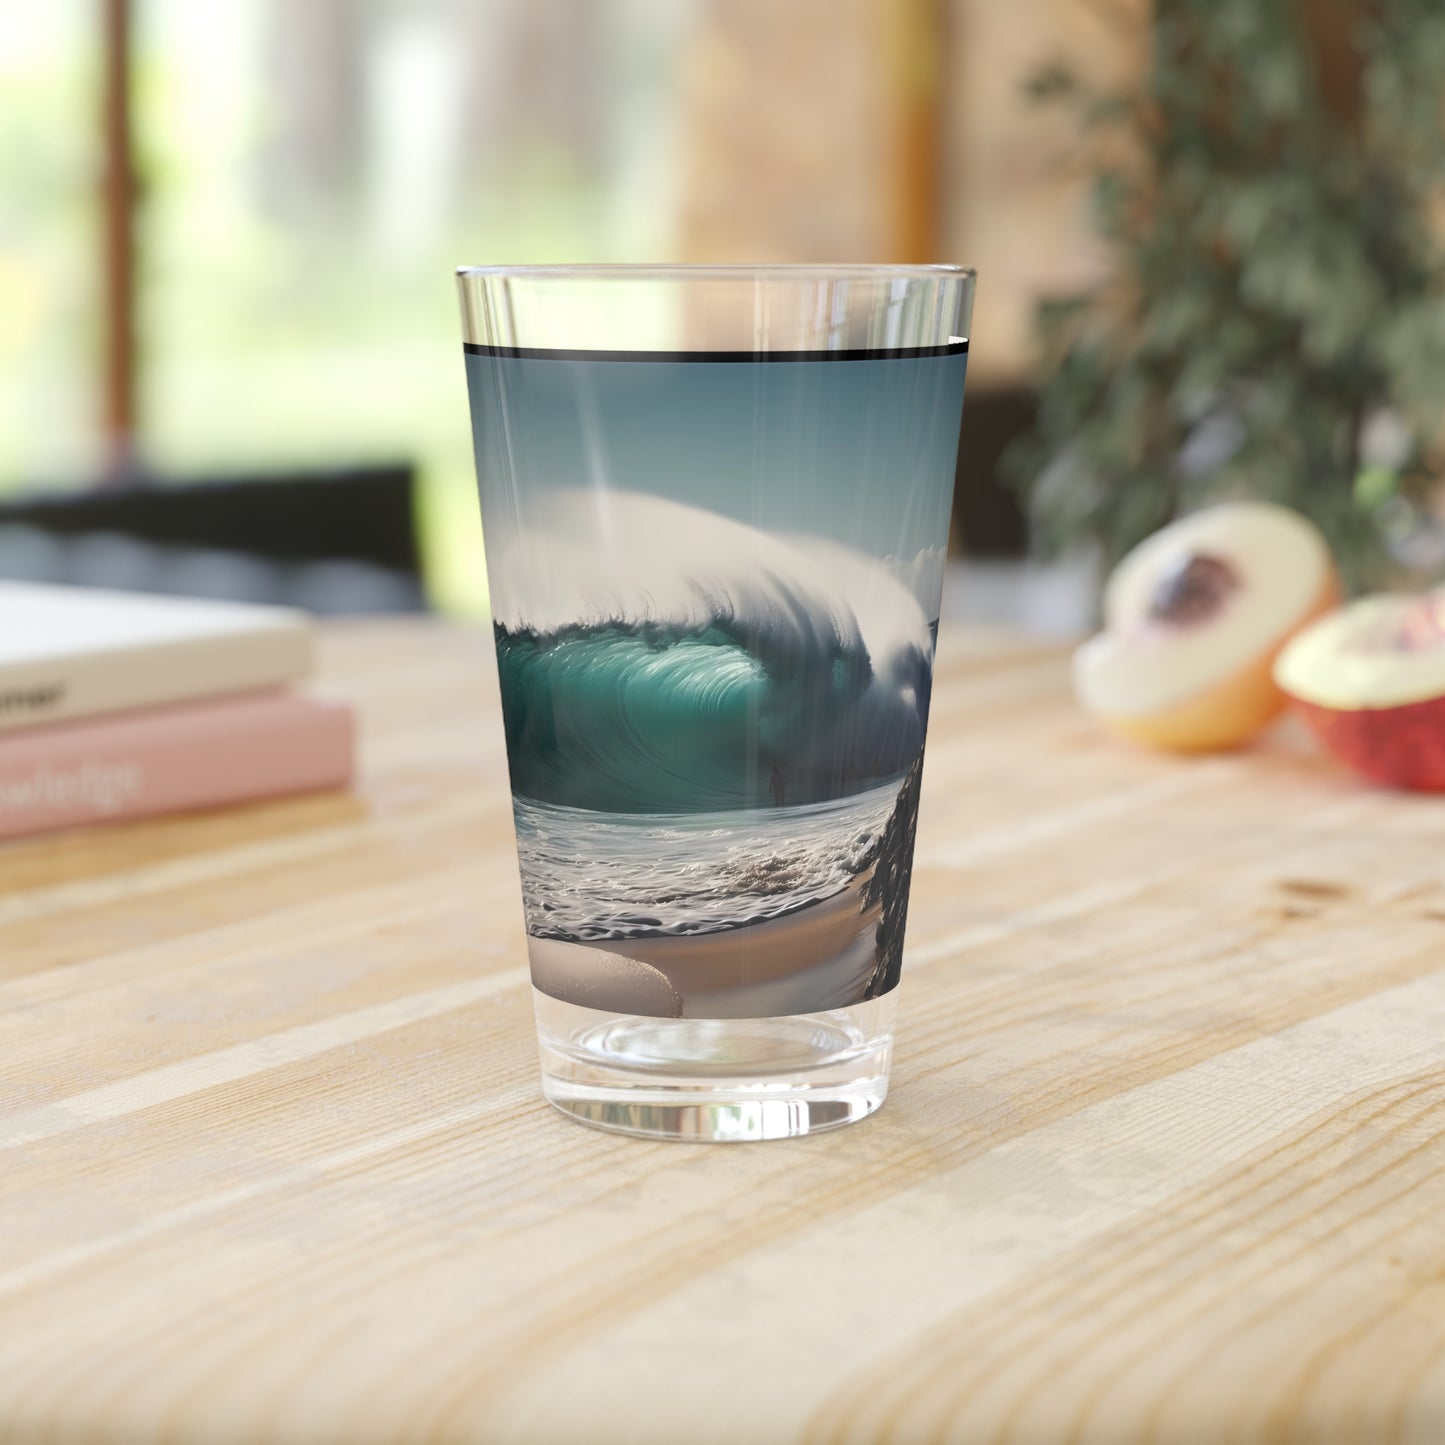 Ride the waves of creativity with Pipeline: North Shore, Oahu Perfect Wave Pint Glass. Surf artistry meets reality, exclusively at Stashbox.ai.